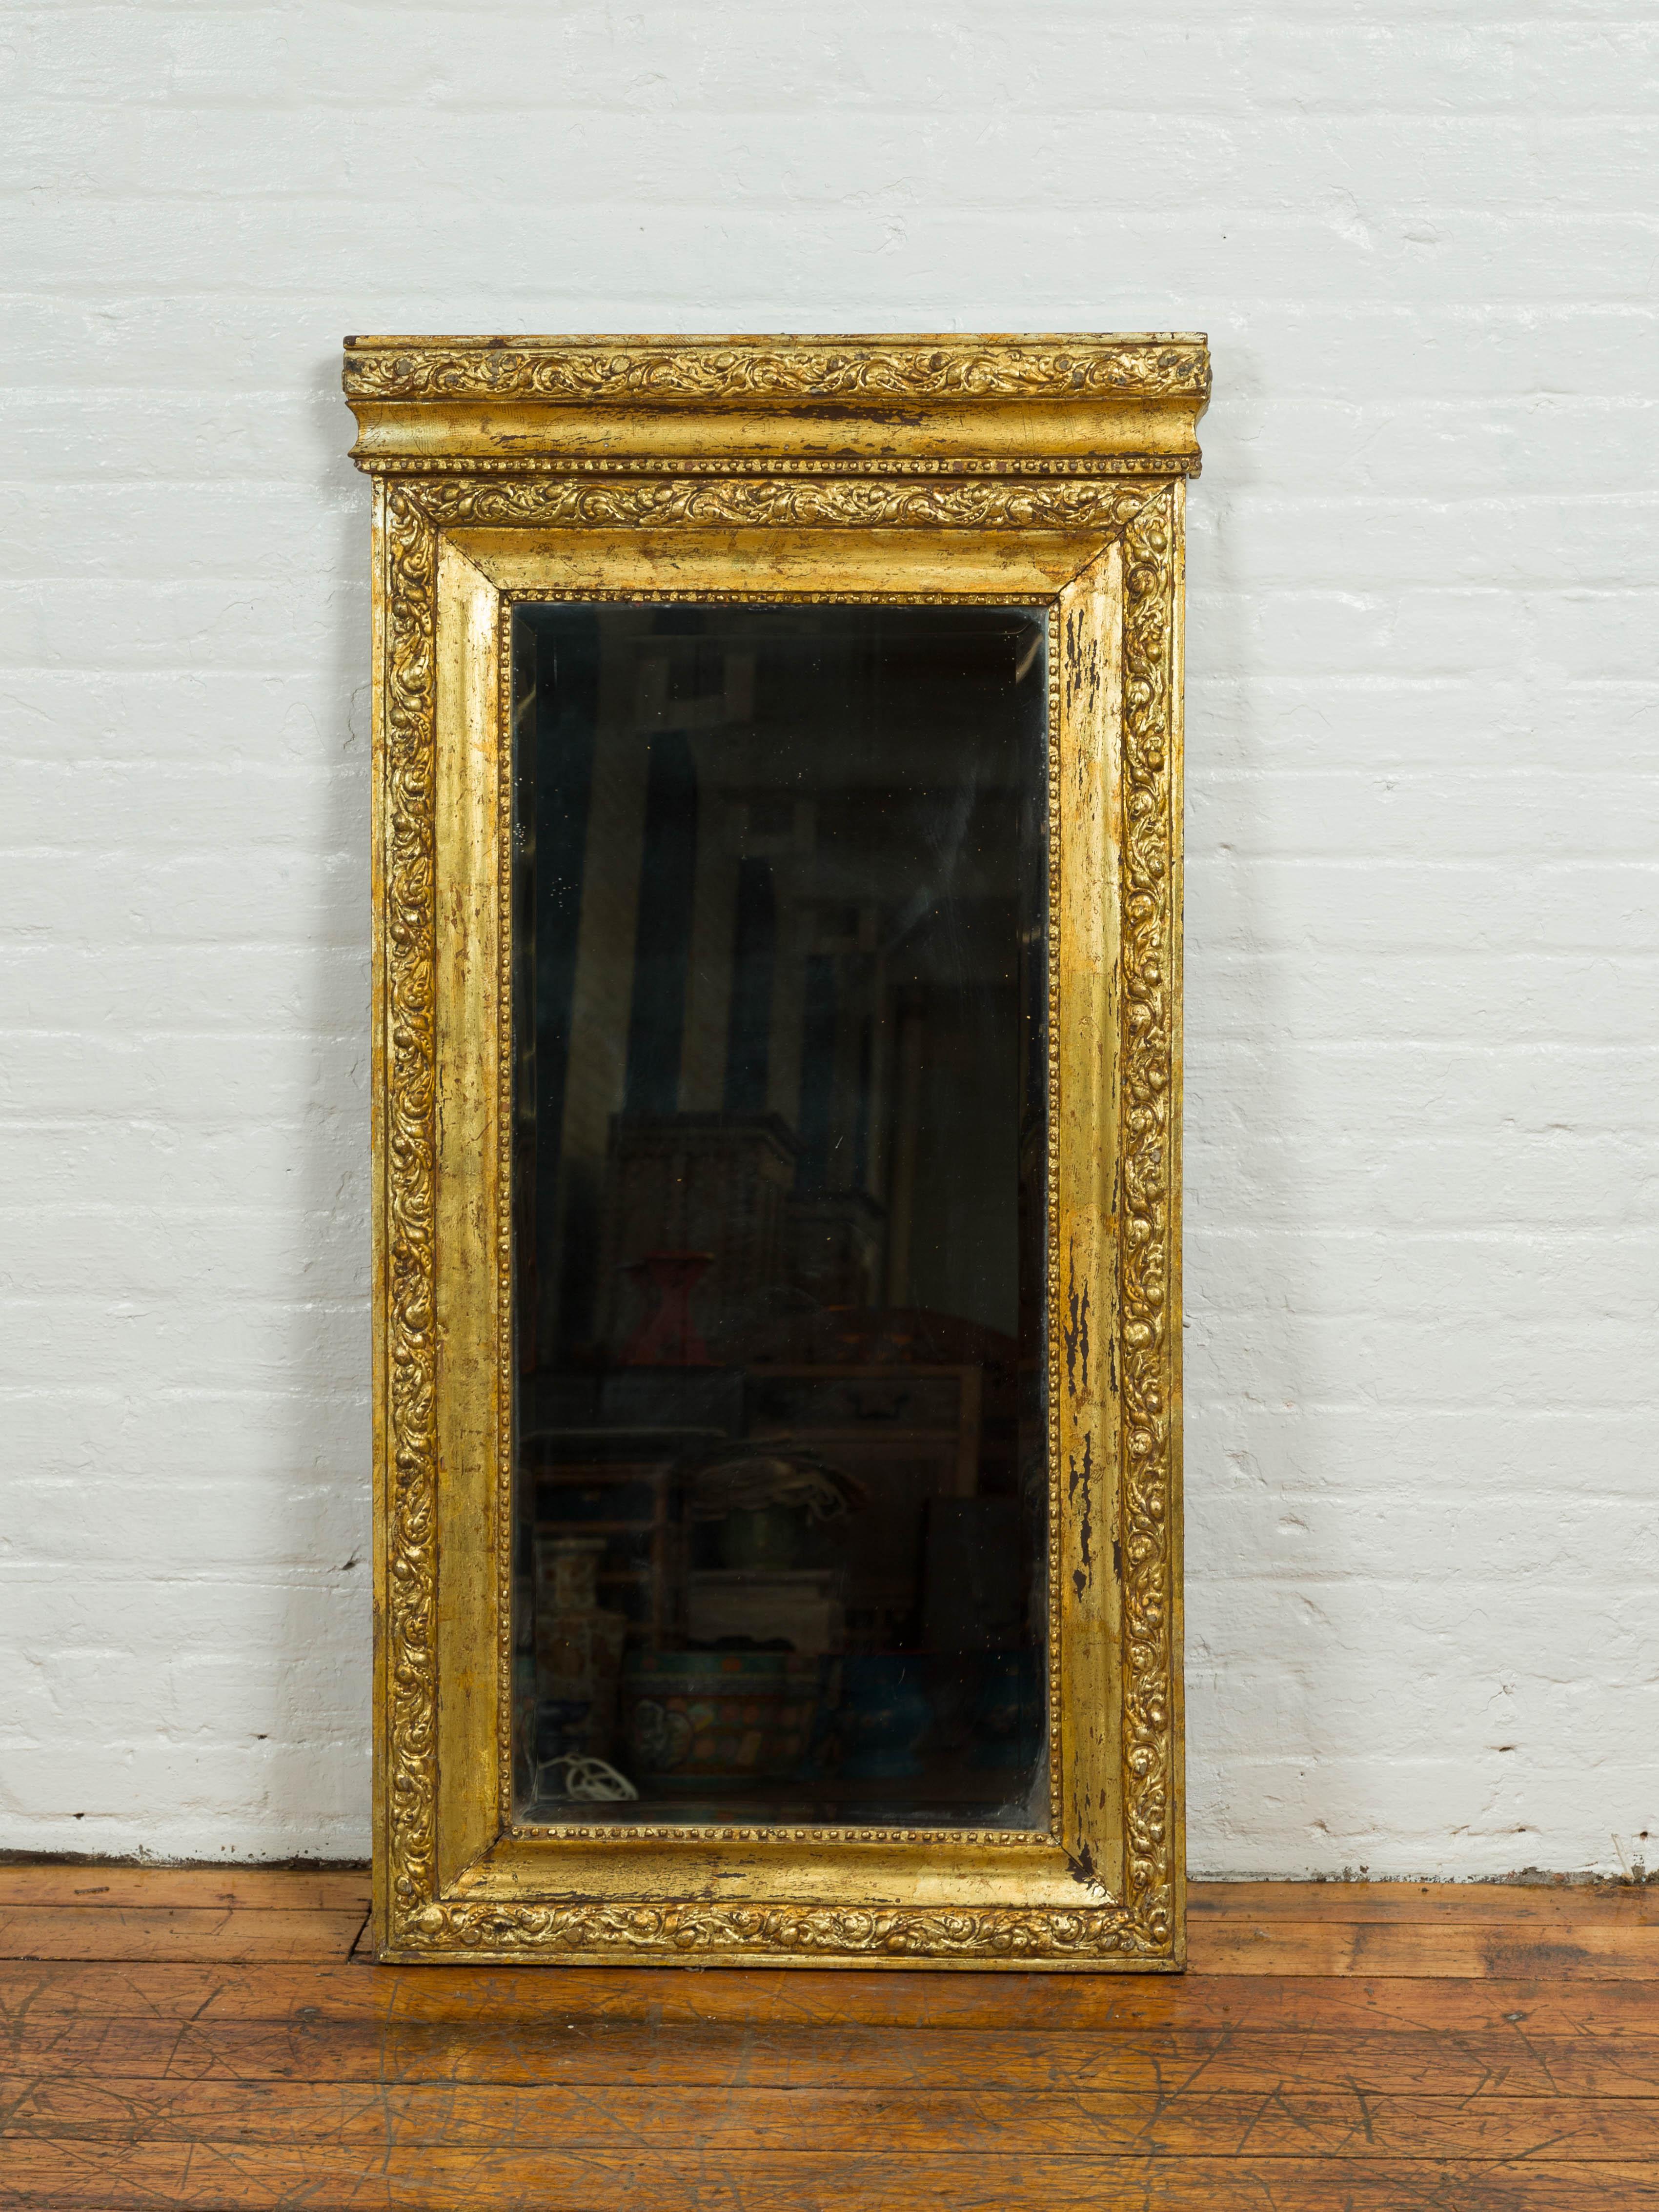 A vintage Chinese vertical giltwood mirror from the mid-20th century, with scrolling foliage and petite beads. Born in China during the midcentury period, this tall and narrow mirror features a giltwood frame topped with a carved cornice and cavetto